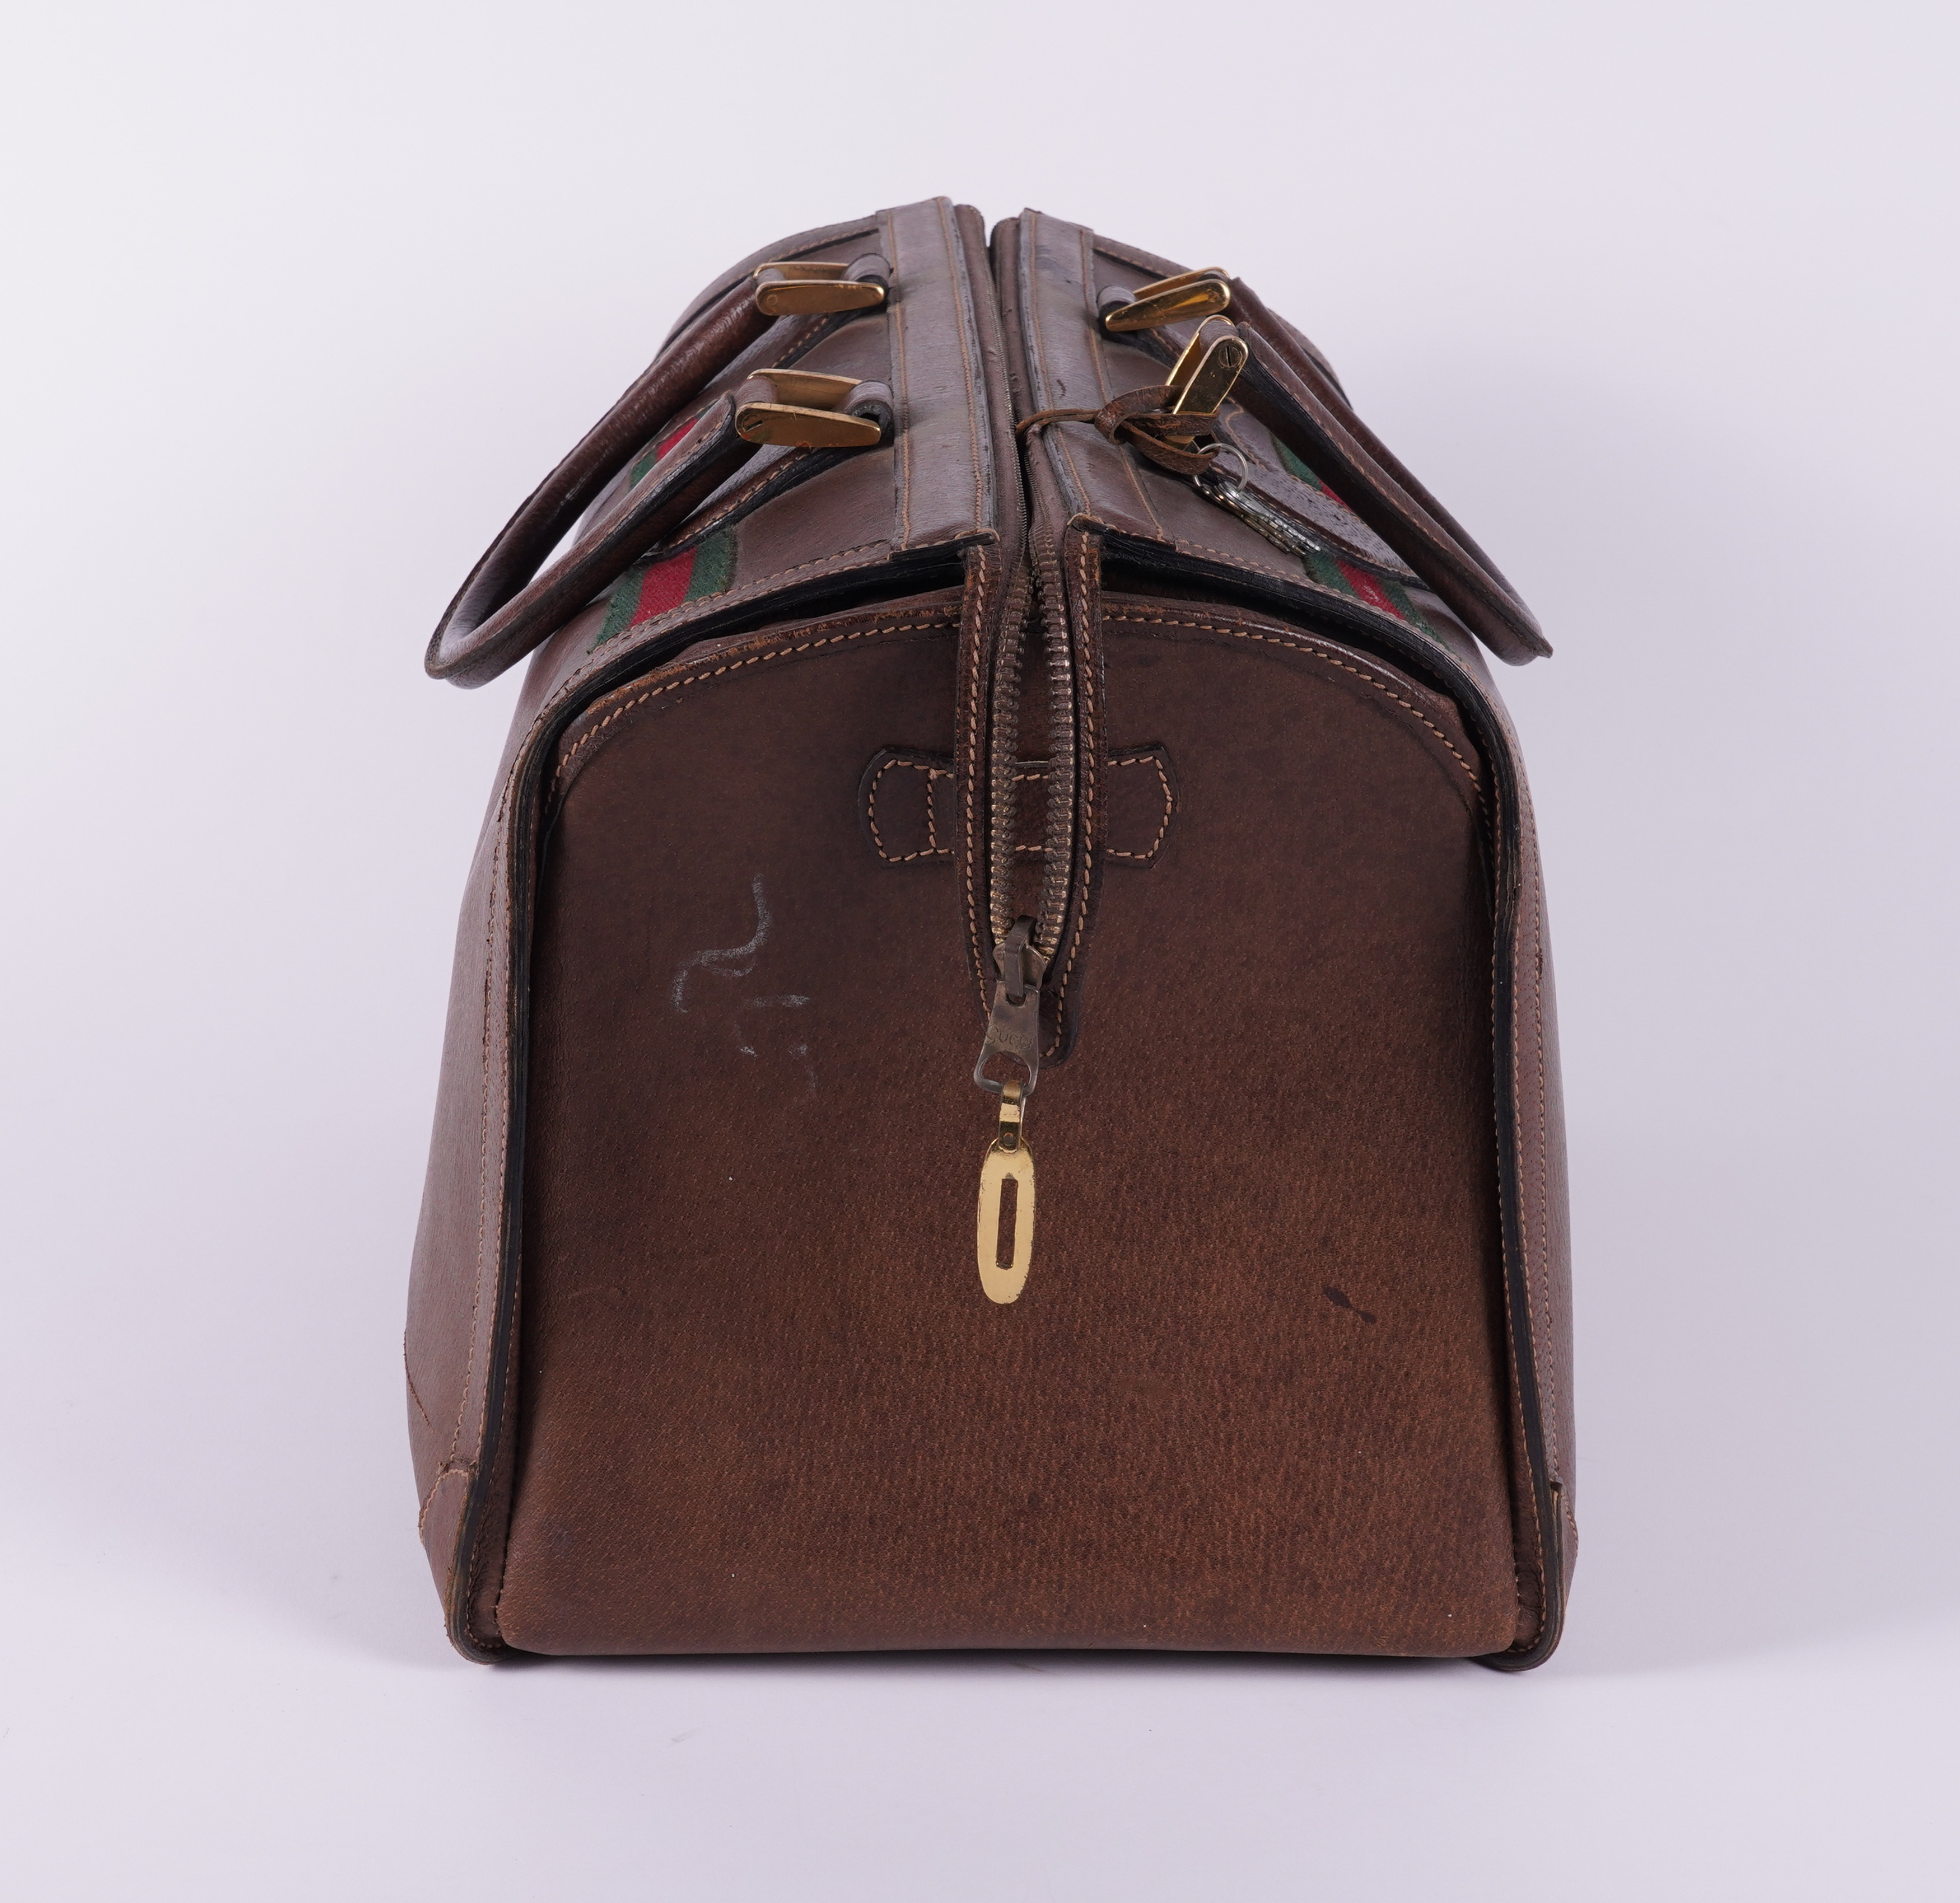 GUCCI: A BROWN LEATHER HOLDALL - Image 2 of 6